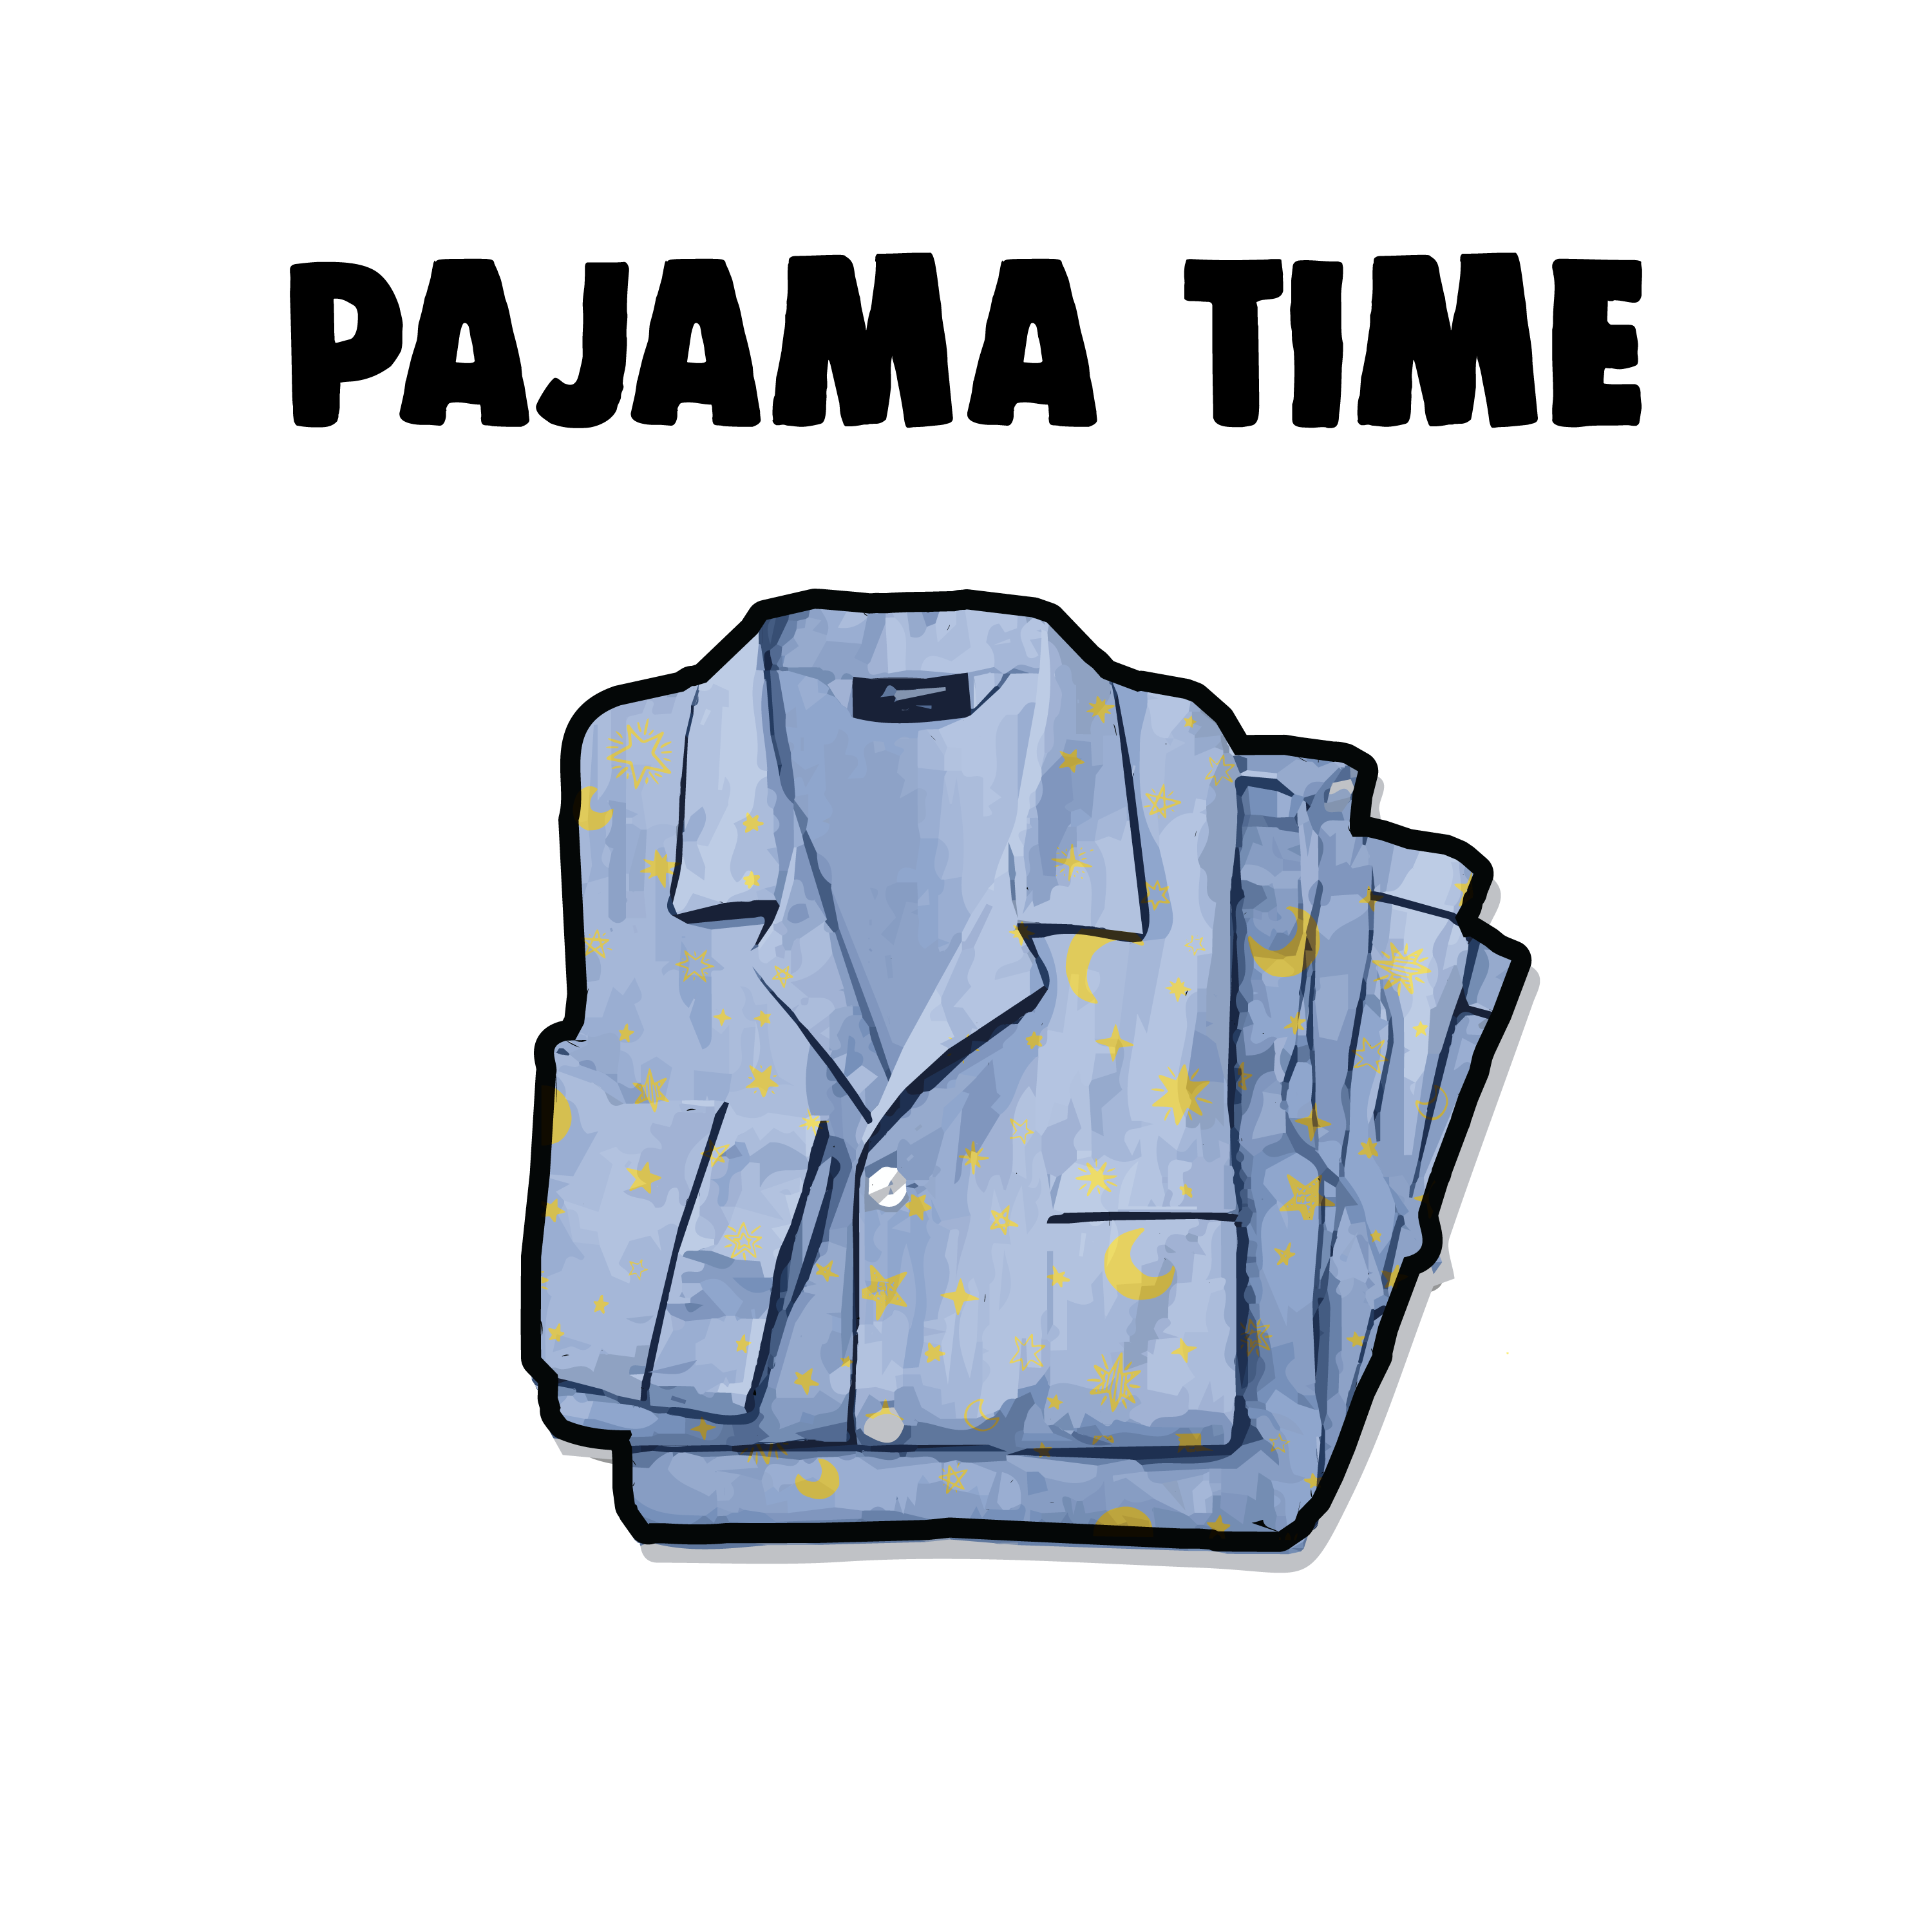 Birthdayy Partyy Show Off Multi-Genre Bass Style in “Pajama Time”